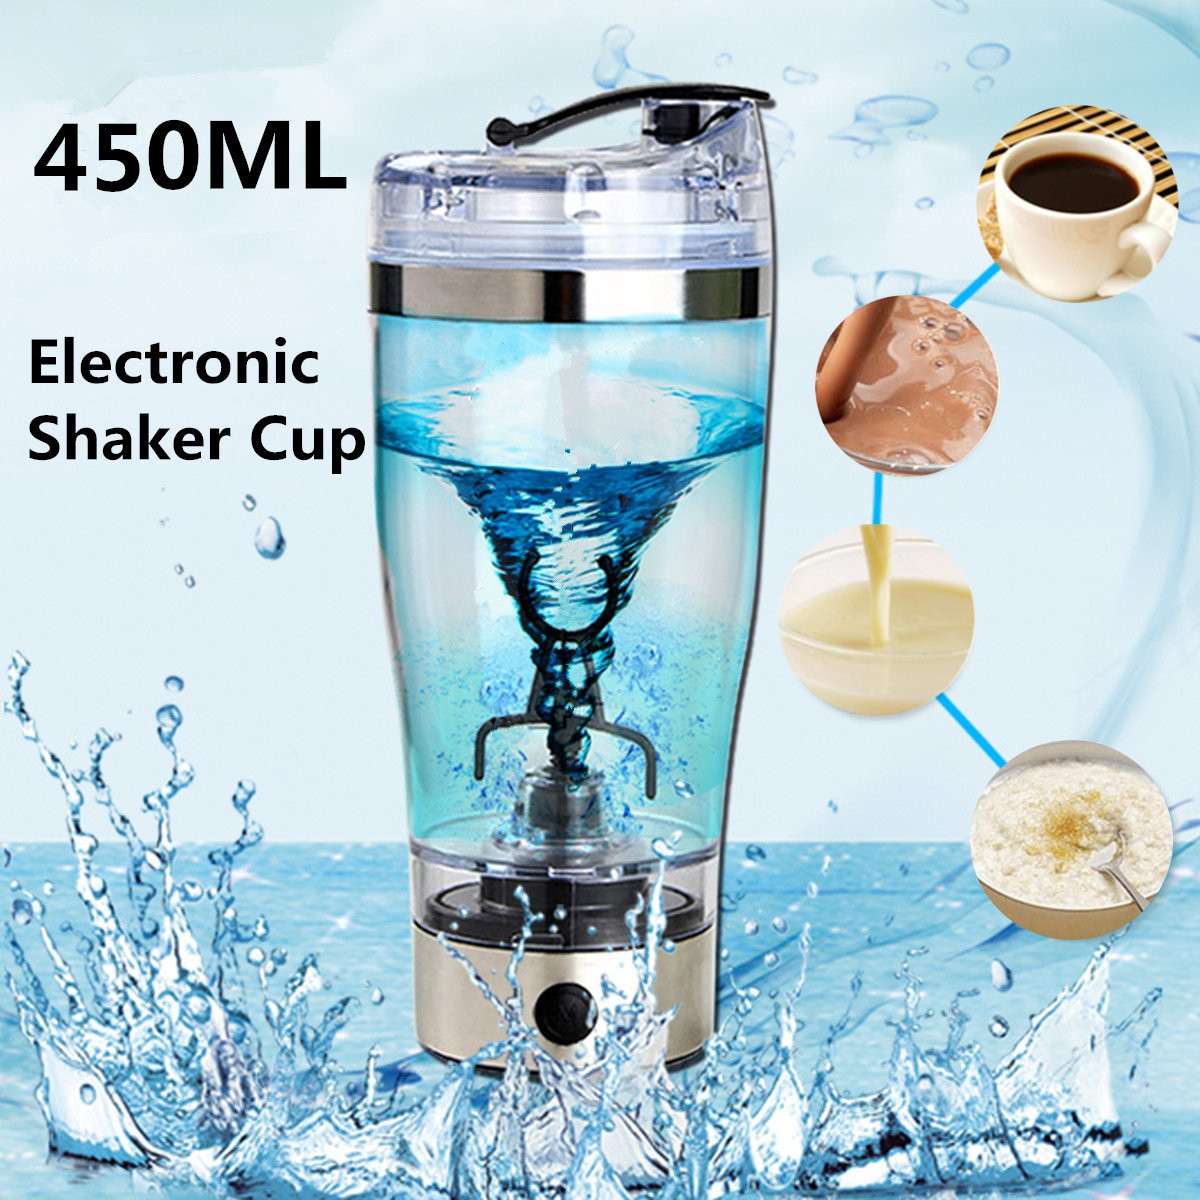 450ML-USB-Charging-Electric-Shaker-Cup-Blender-Detachable-Mixing-Cup-Fitness-Protein-Powder-Shake-Cu-1637799-2